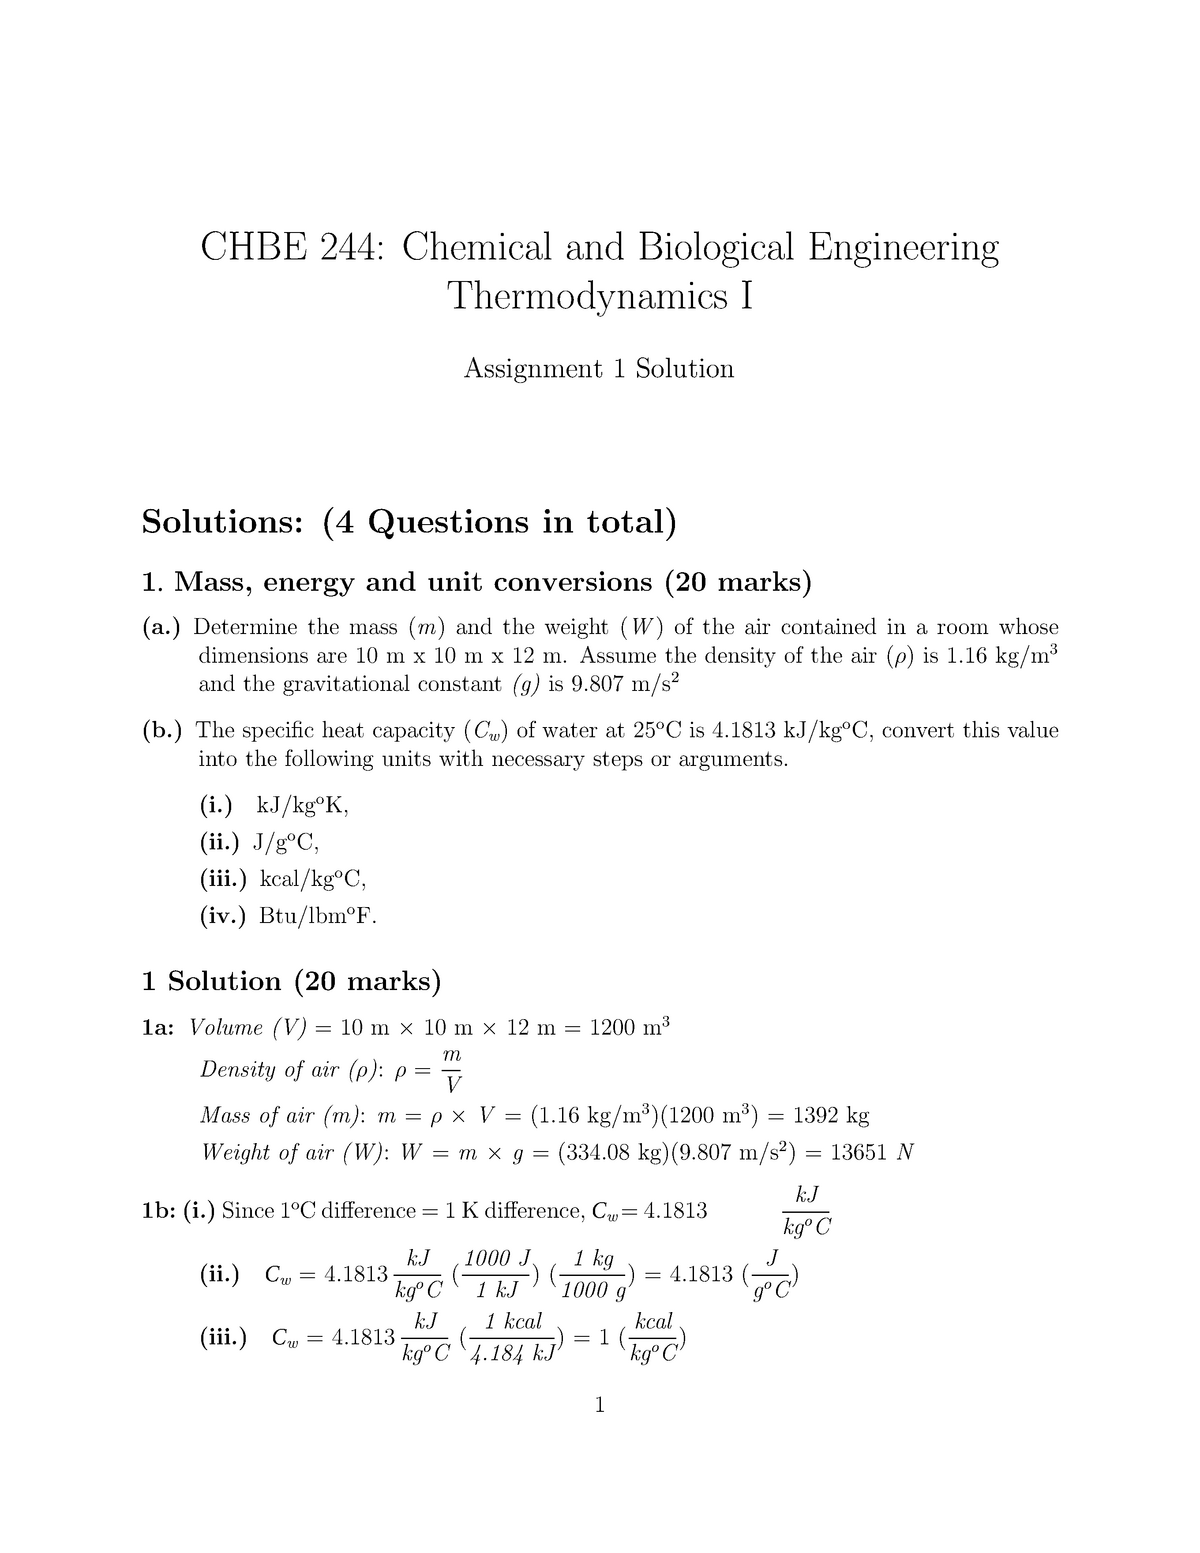 Chbe244 Assignment 01 Solutions Chbe 244 Chemical And Biological Engineering Studocu